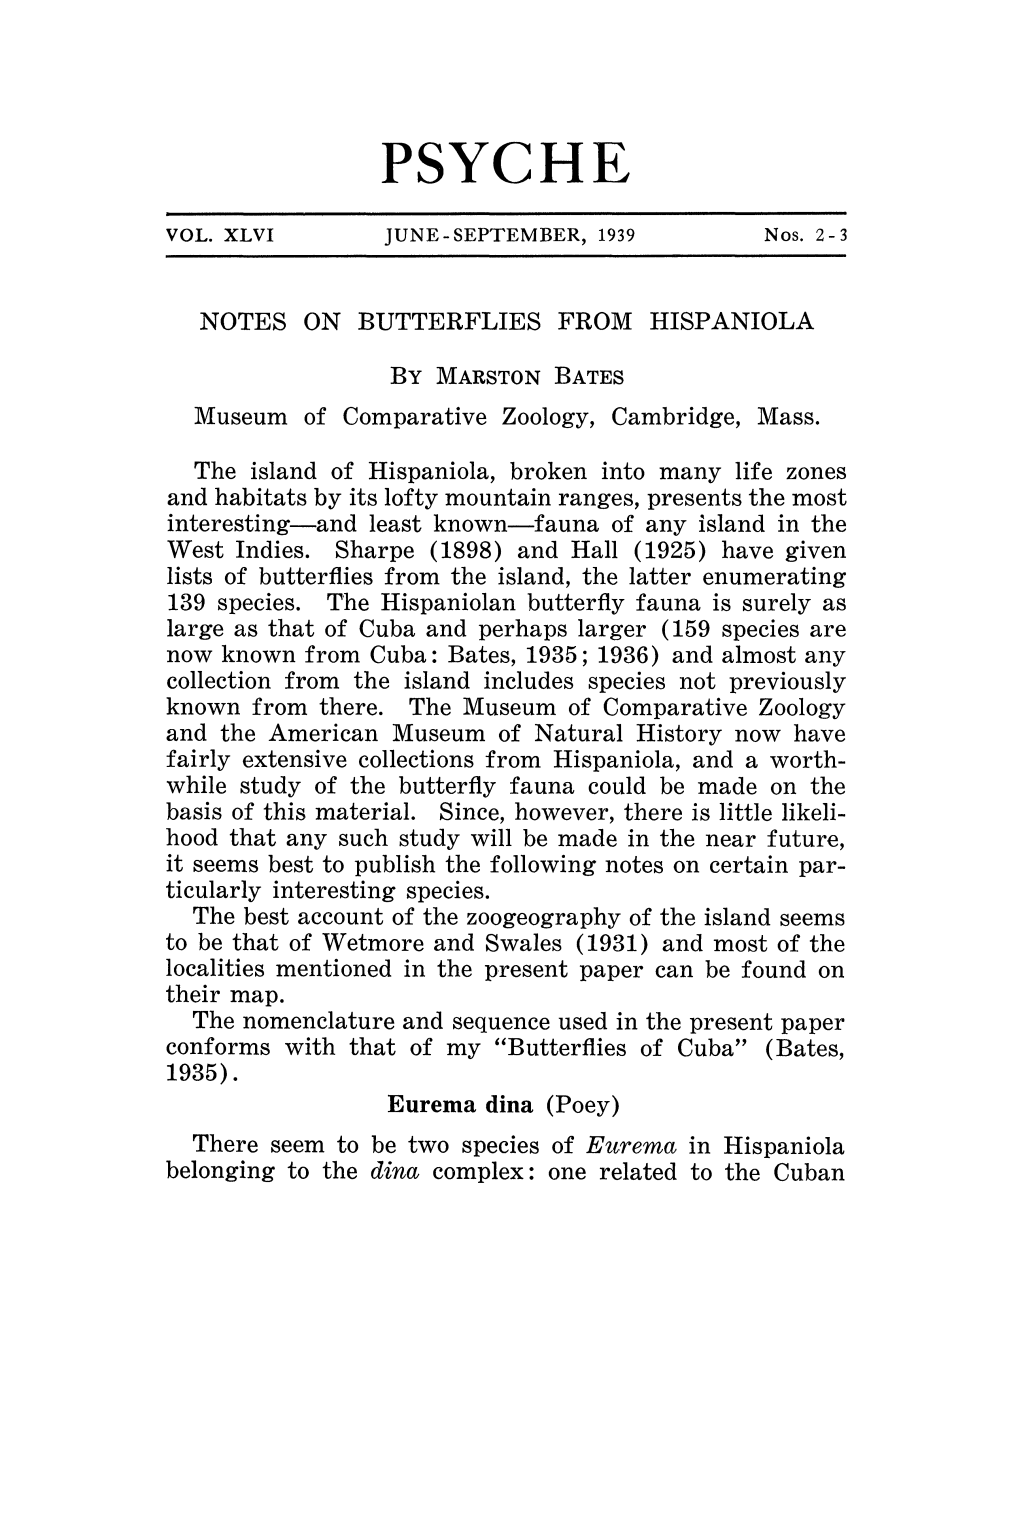 Notes on Butterflies from Hispaniola